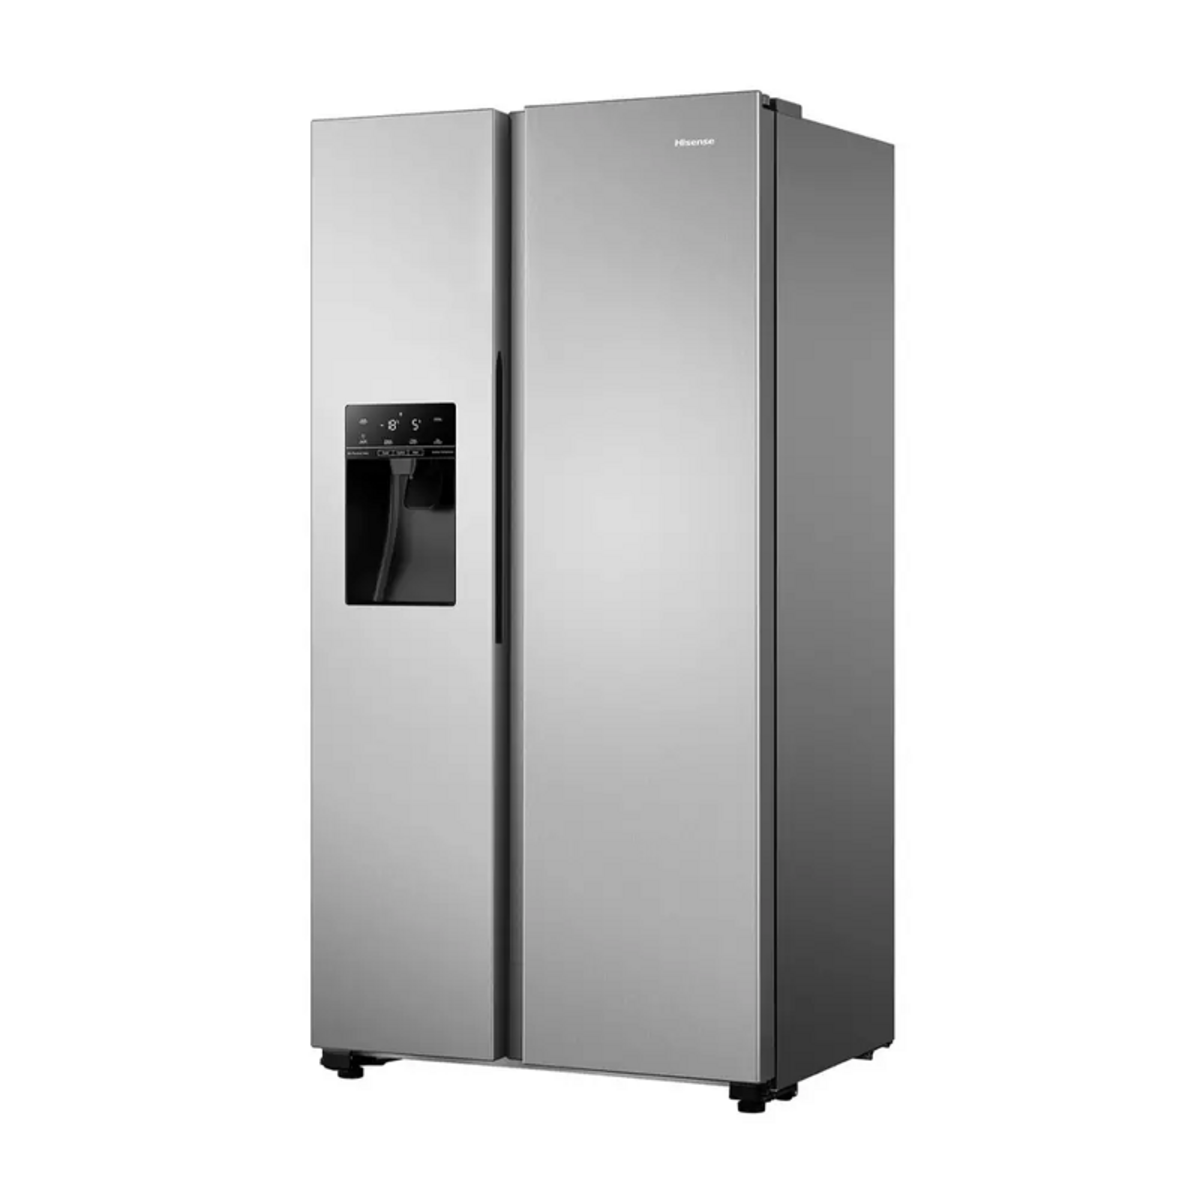 Hisense RS694N4TCF F Rated American Style Fridge Freezer, Stainless Steel